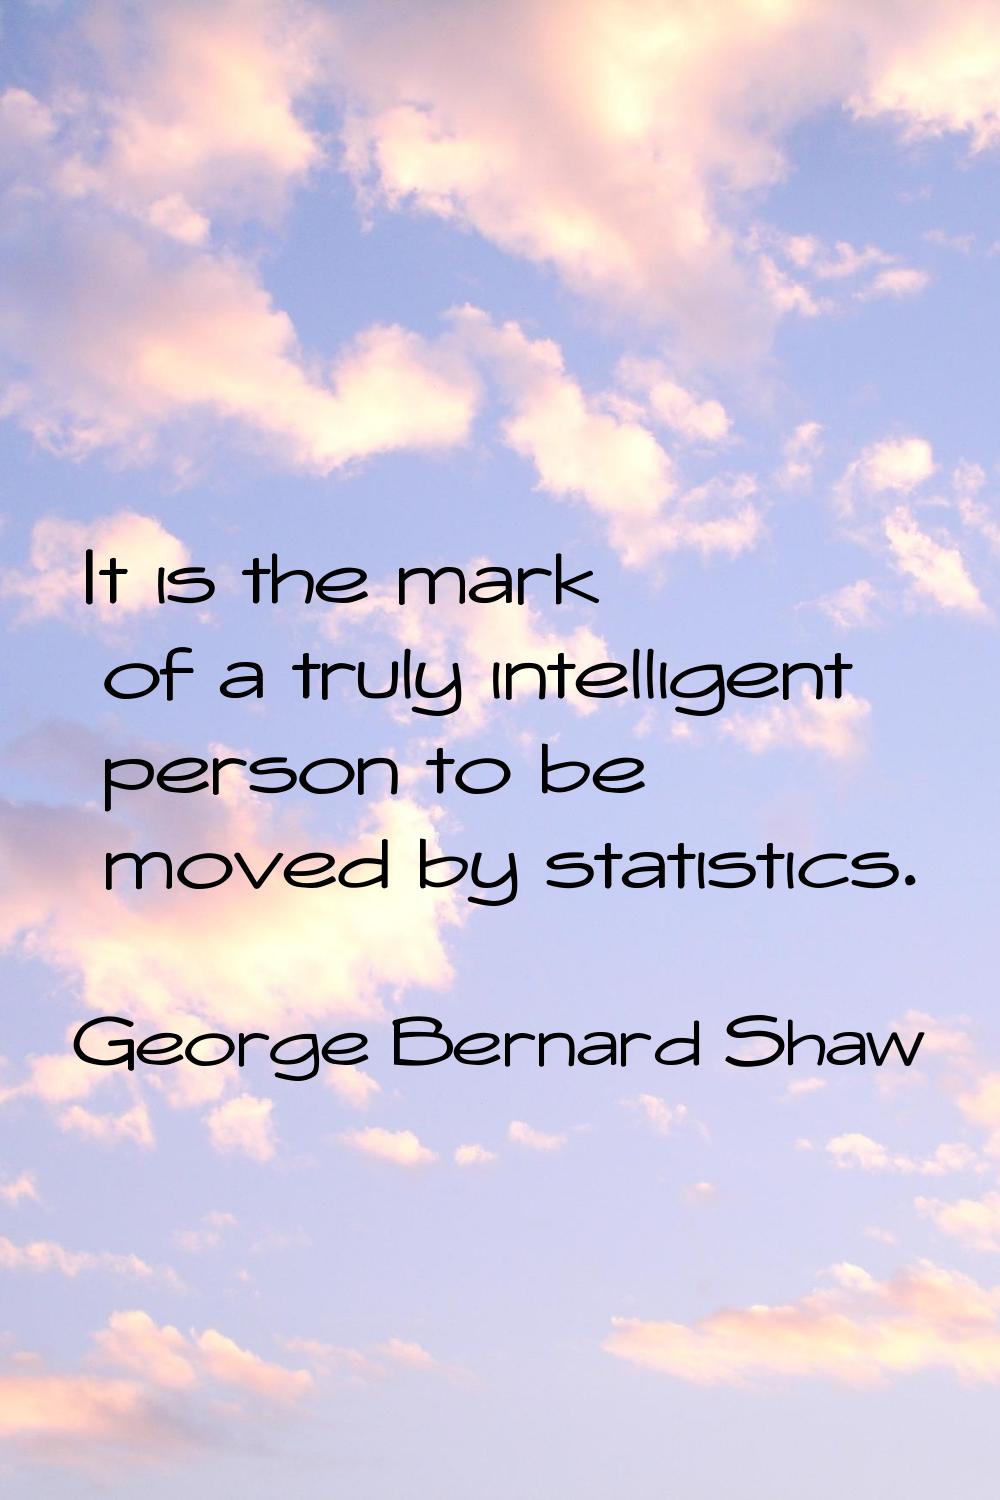 It is the mark of a truly intelligent person to be moved by statistics.